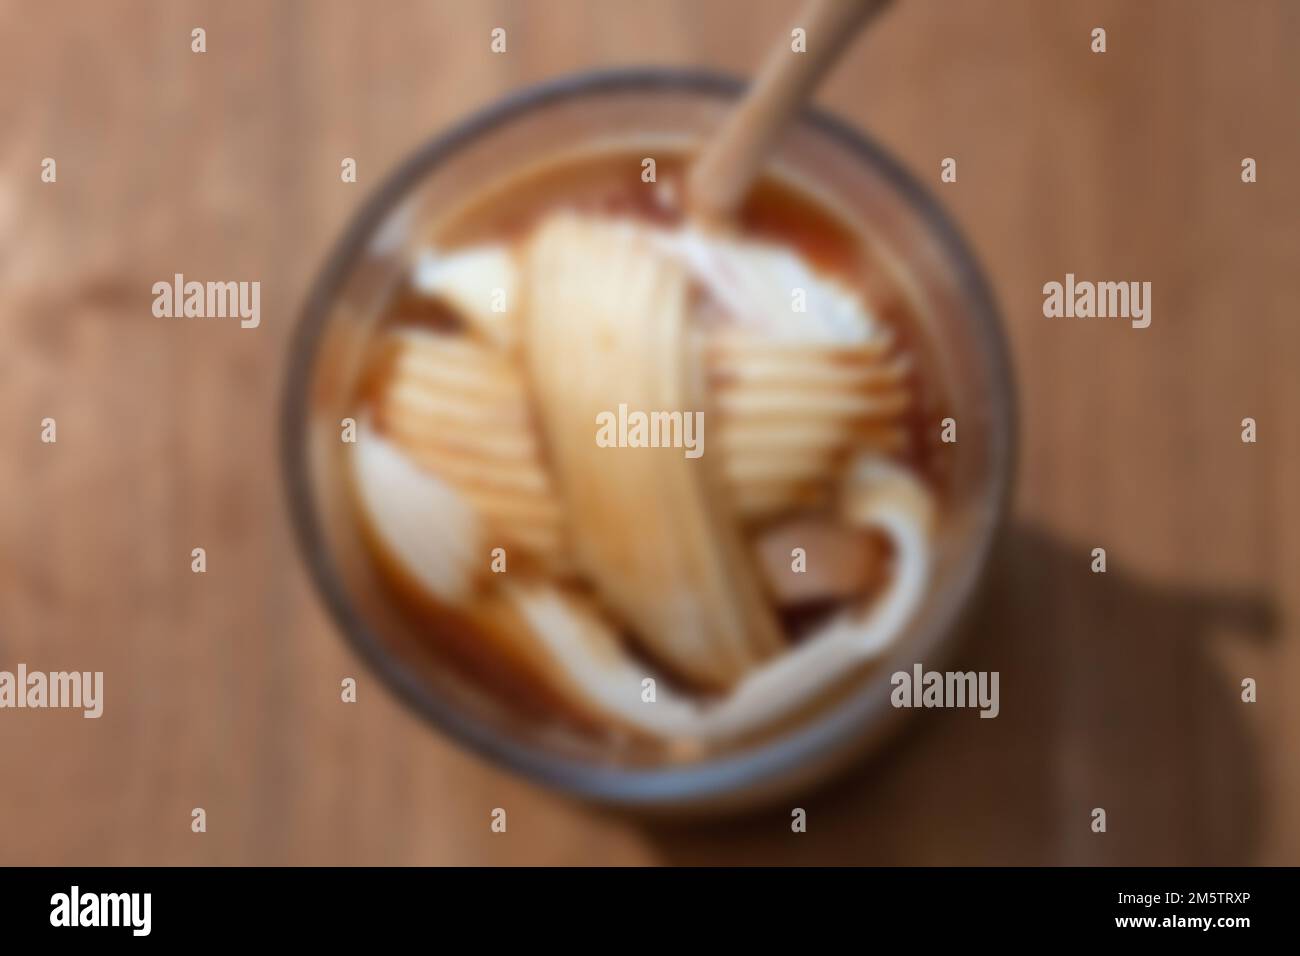 Glass of americano mixed with coconut blur background, stock photo Stock Photo